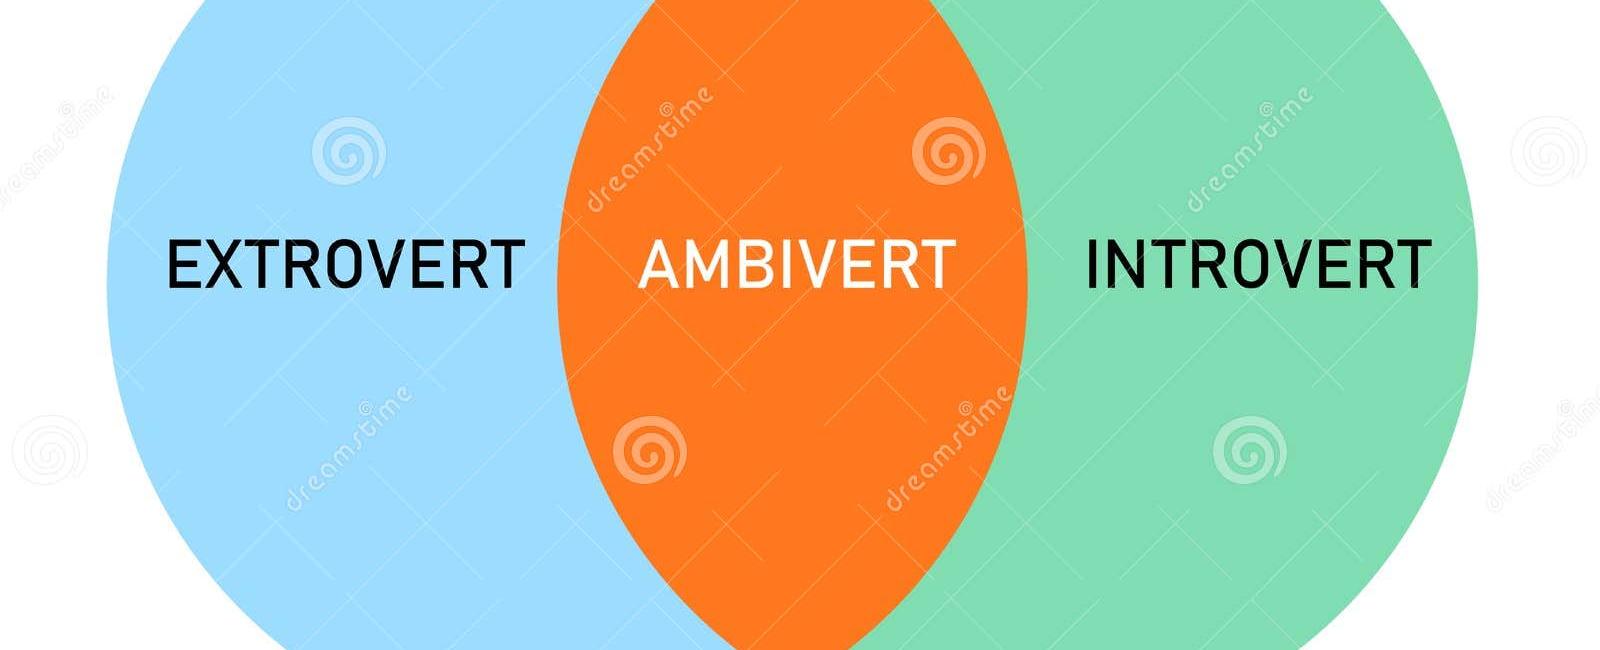 Ambivert is the balance between introvert and extrovert